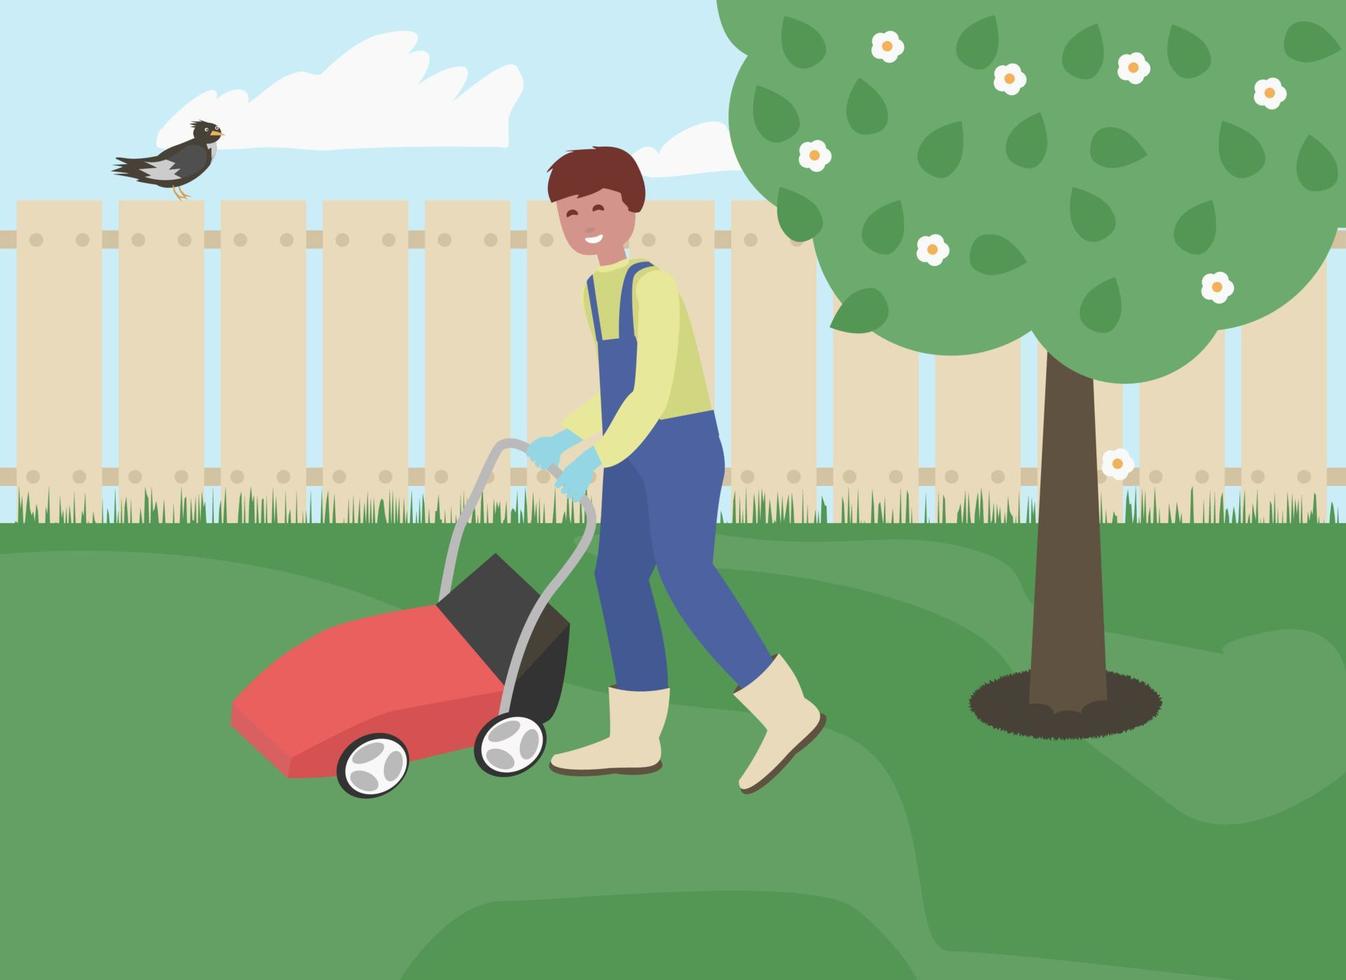 Young man cutting grass in his garden with grass cutter. lawnmower vector